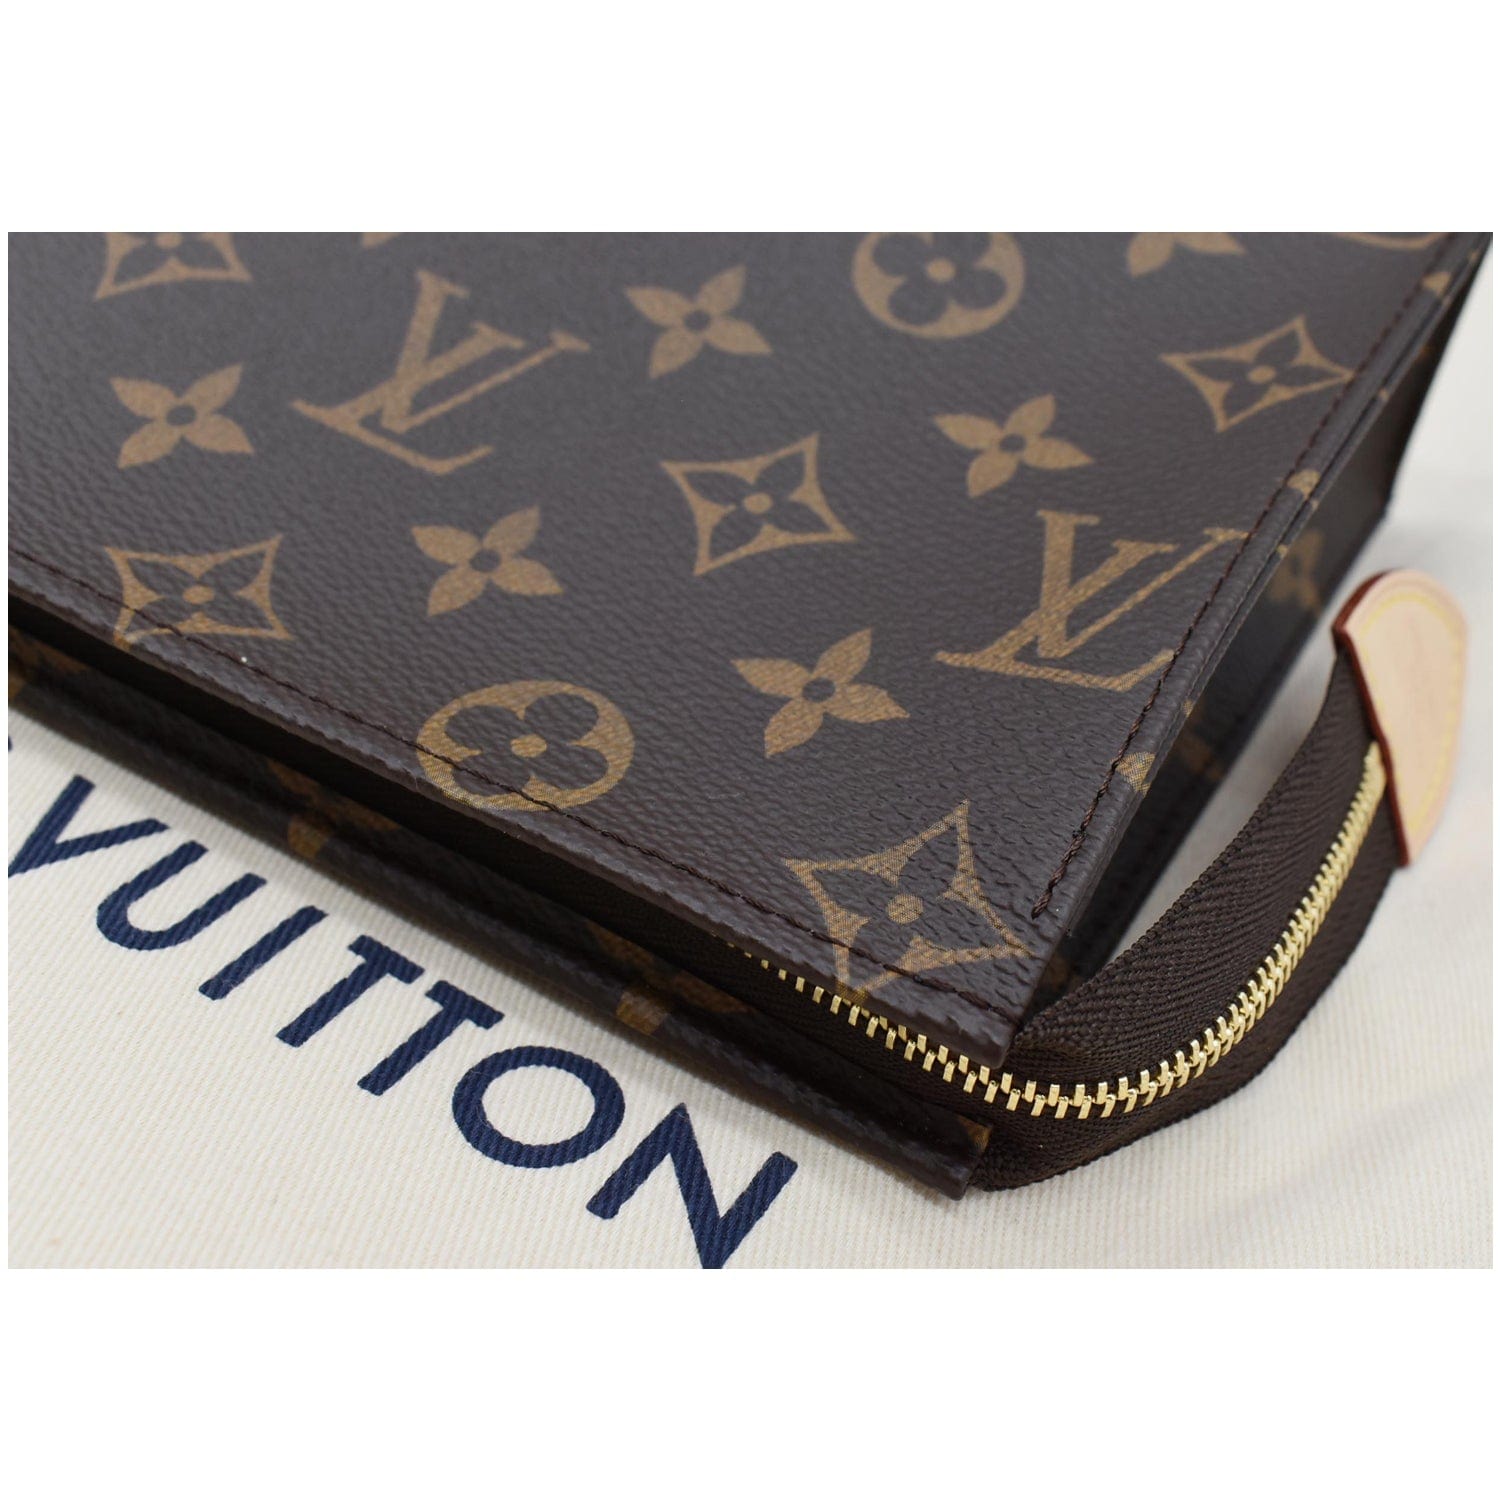 Louis Vuitton Items that make me SWOON, Gallery posted by Caseyb_0